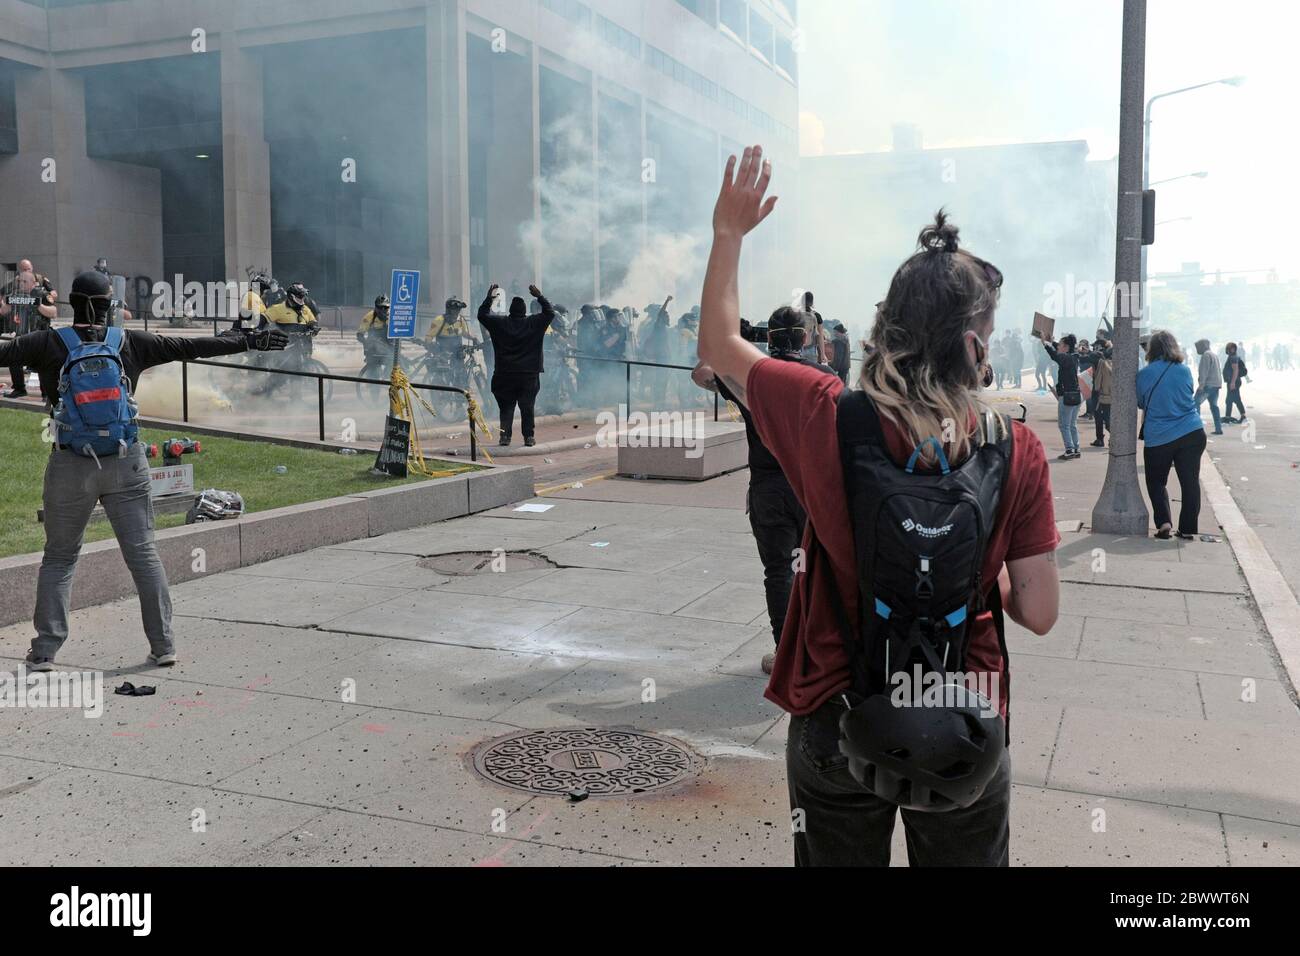 Protesters raise their hands in front of the Cleveland Justice Center during protests resulting in tear gassing by Cleveland police in Cleveland, Ohio, USA.  The May 30, 2020 protest was in response to the killing of George Floyd at the hands of police as well as numerous others across the US contributing to the Black Lives Matter movement. Stock Photo